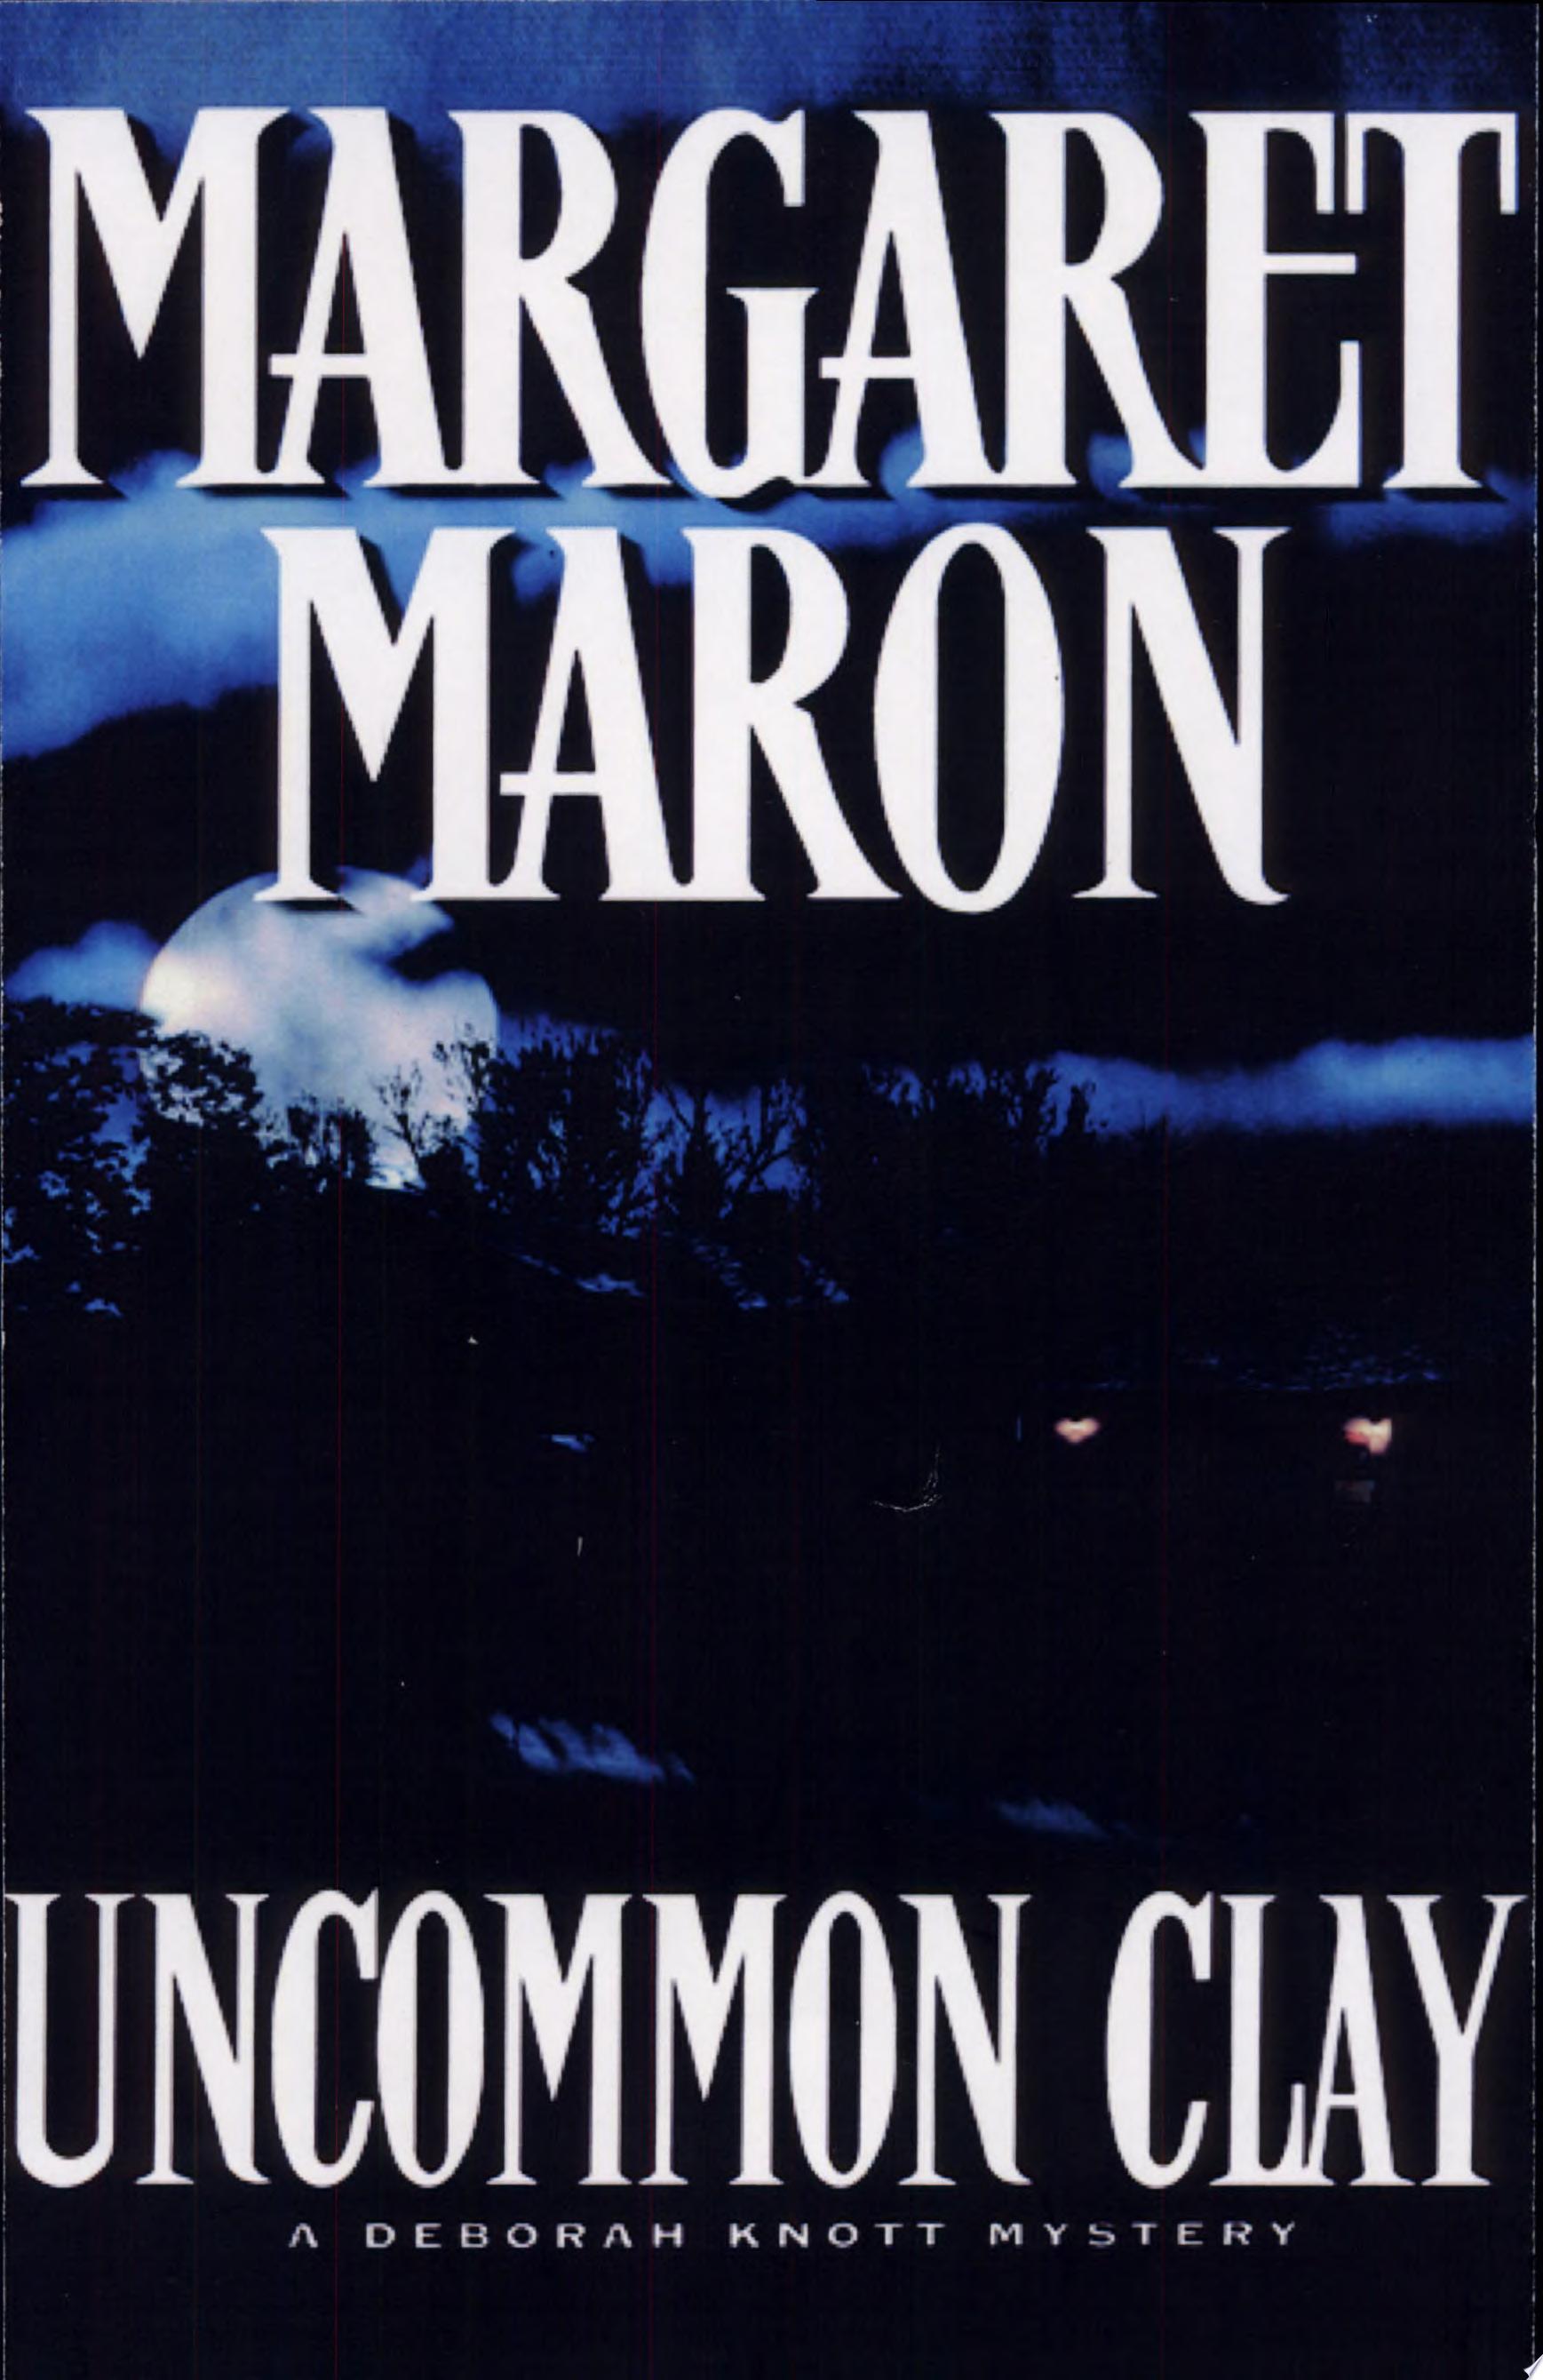 Image for "Uncommon Clay"